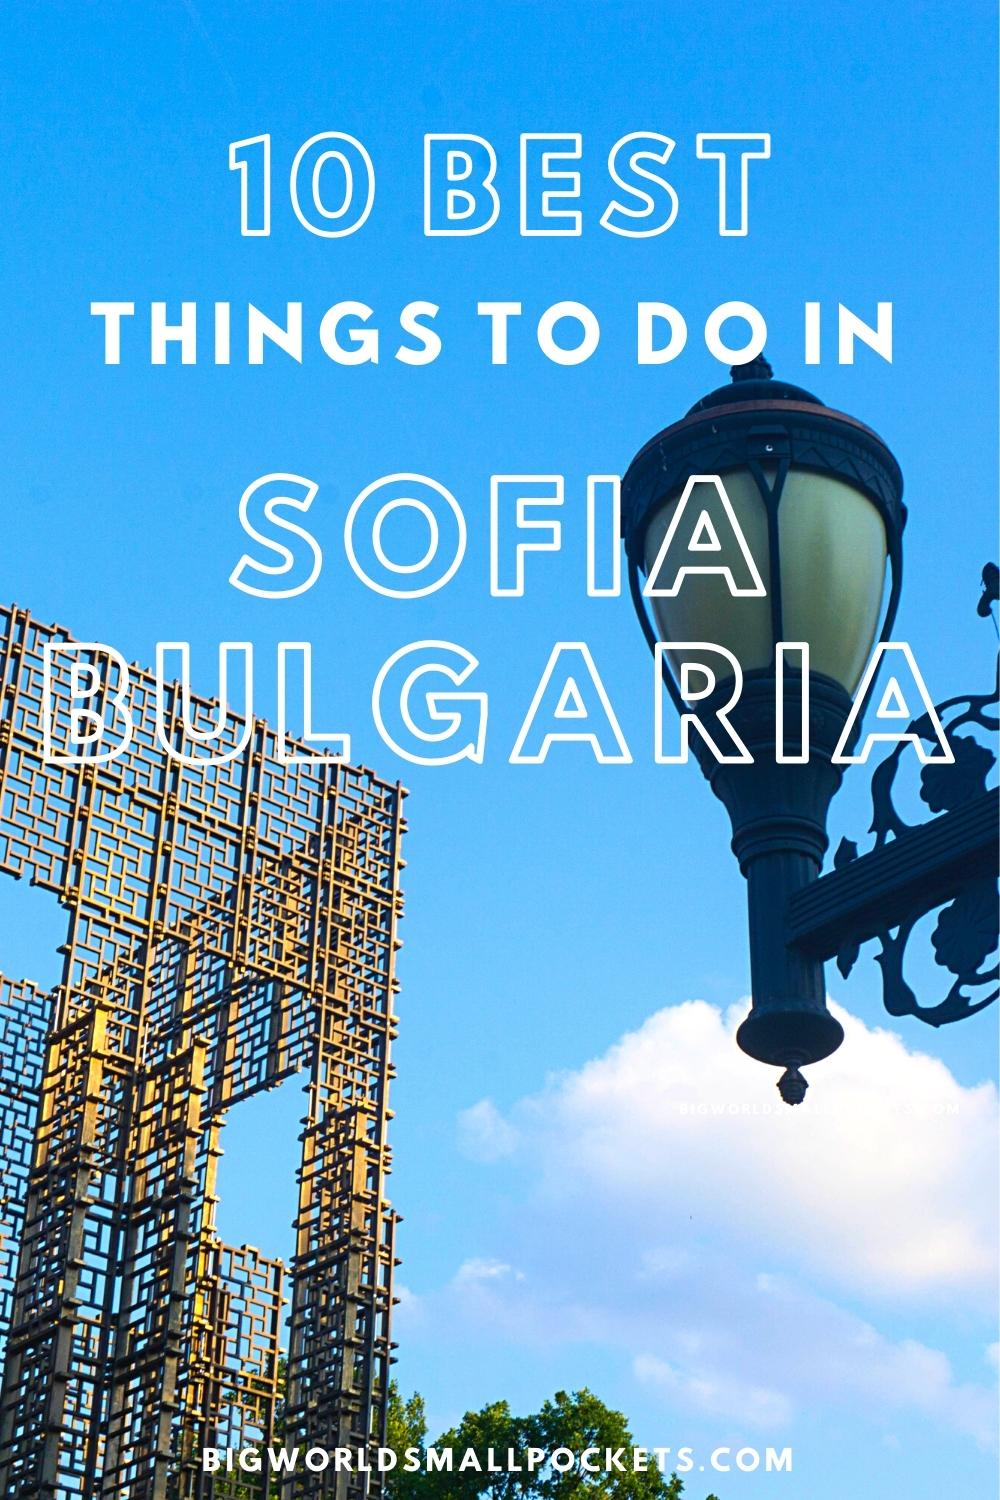 Top 10 Things to Do in Sofia in Bulgaria